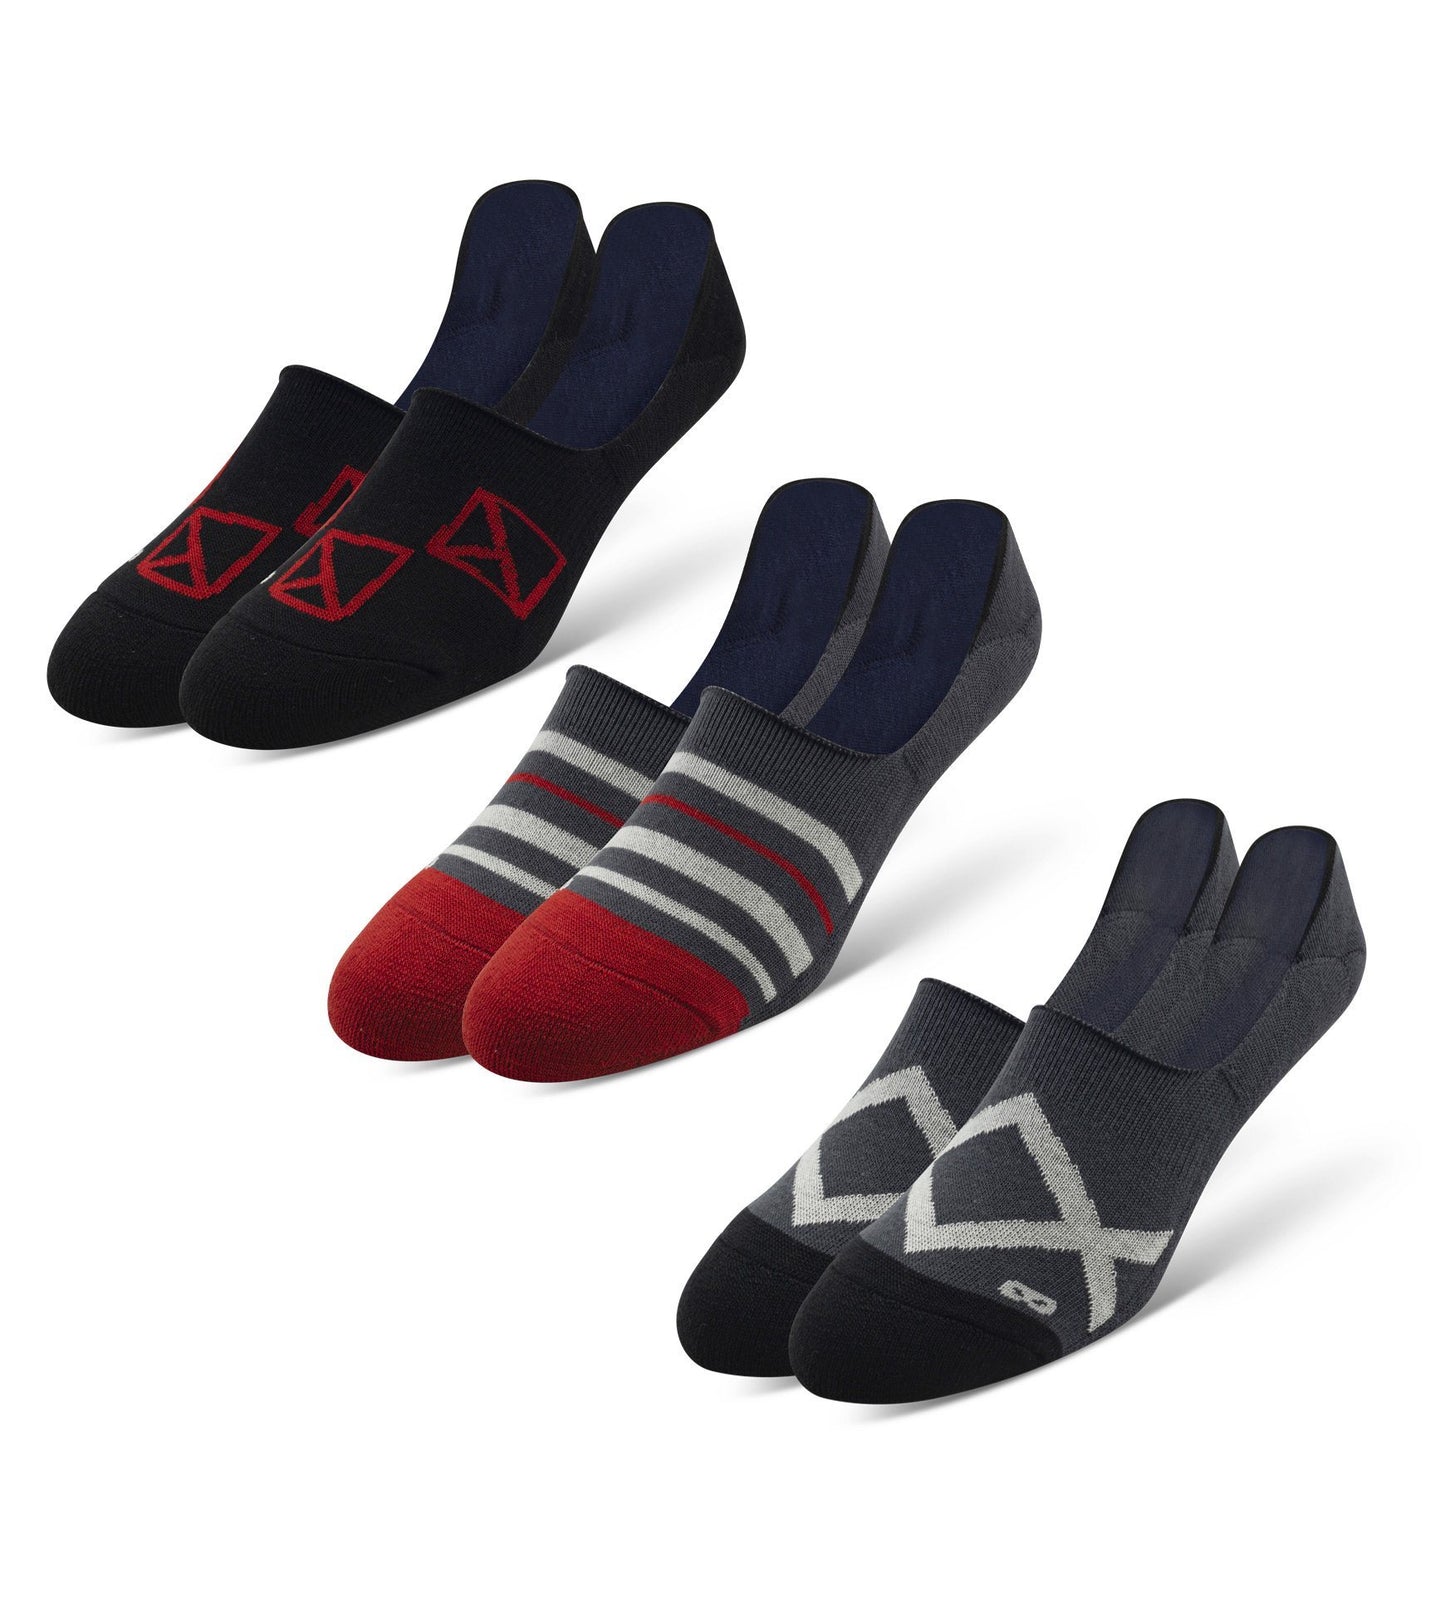 Cushion No Show Socks 3 Pack in grey, red, and light grey